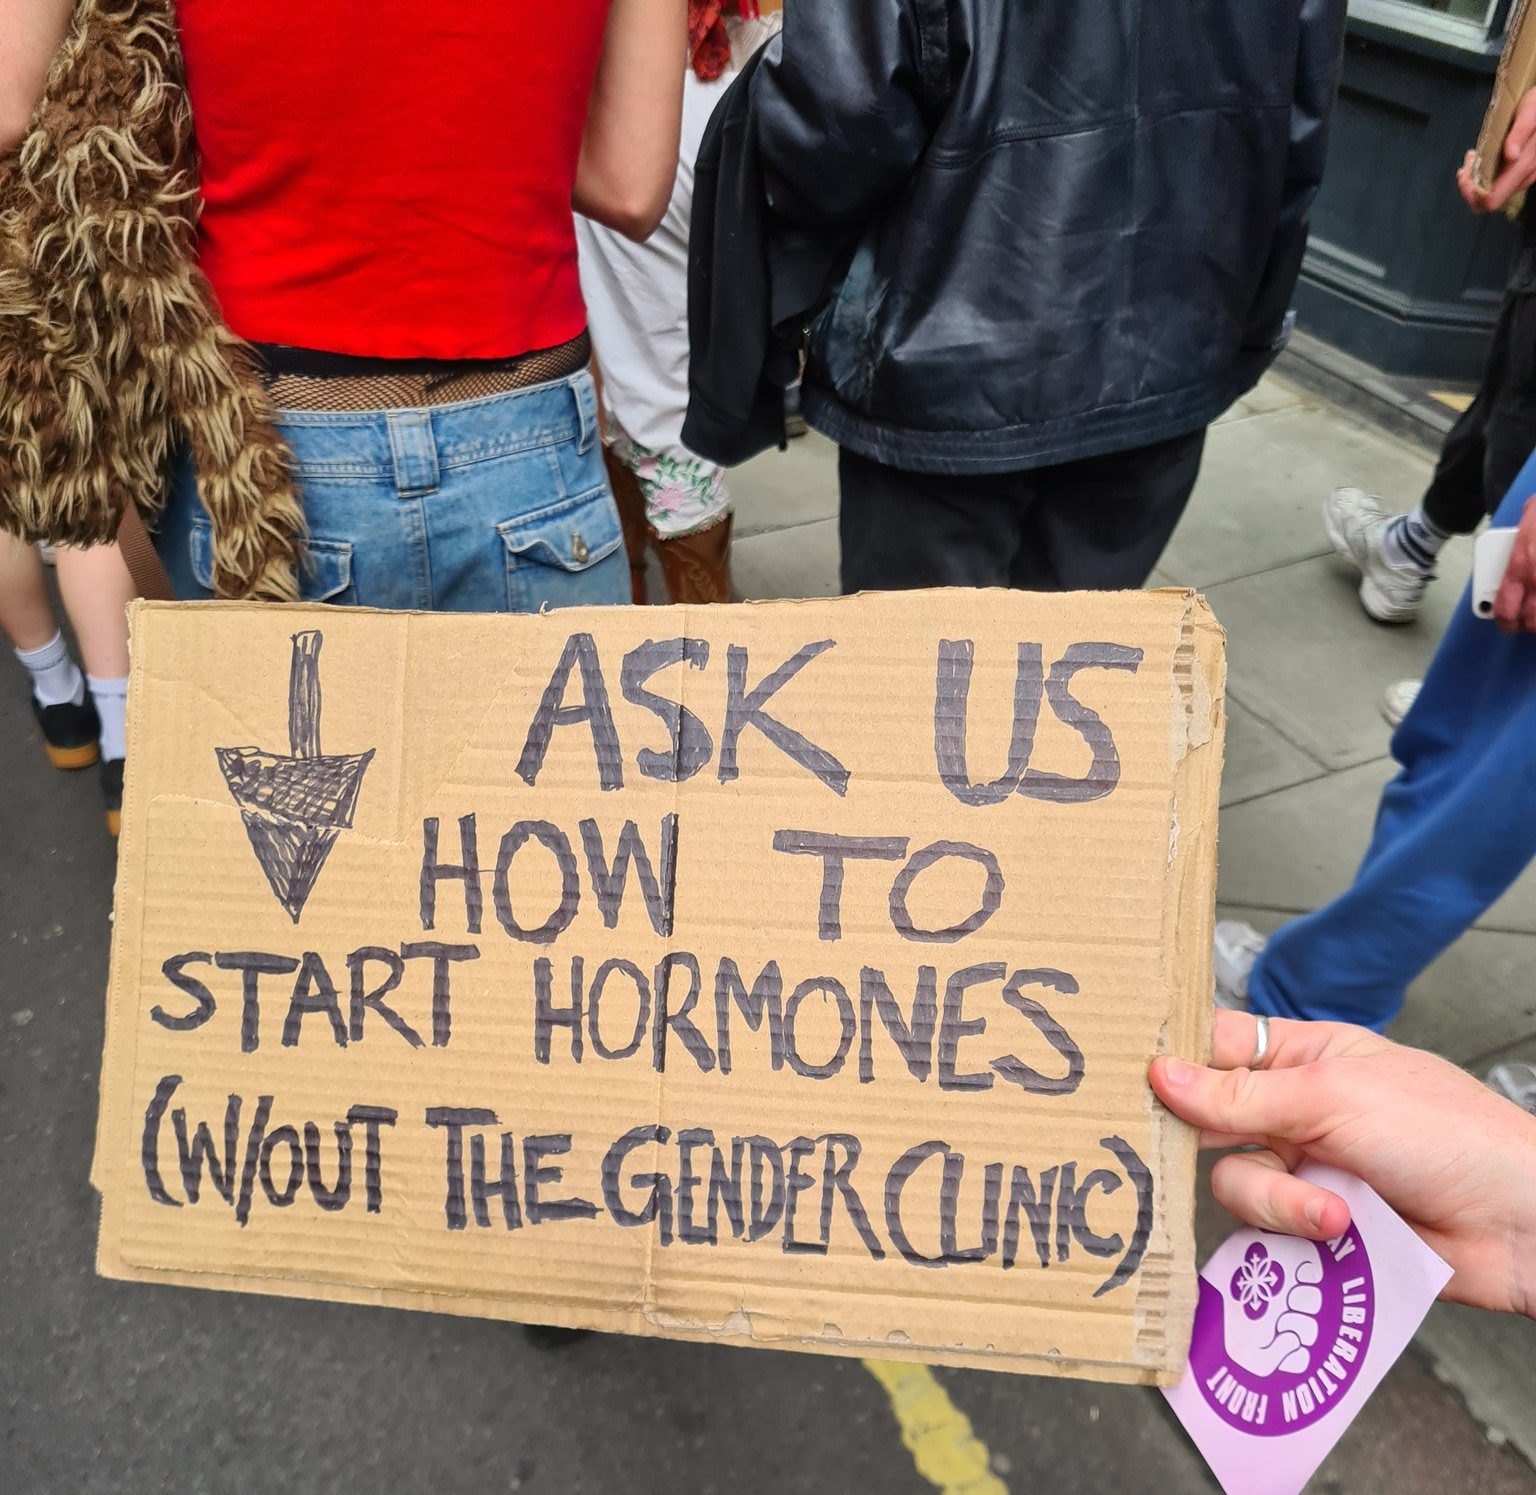 A sign from Trans Pride London 2021 which reads 